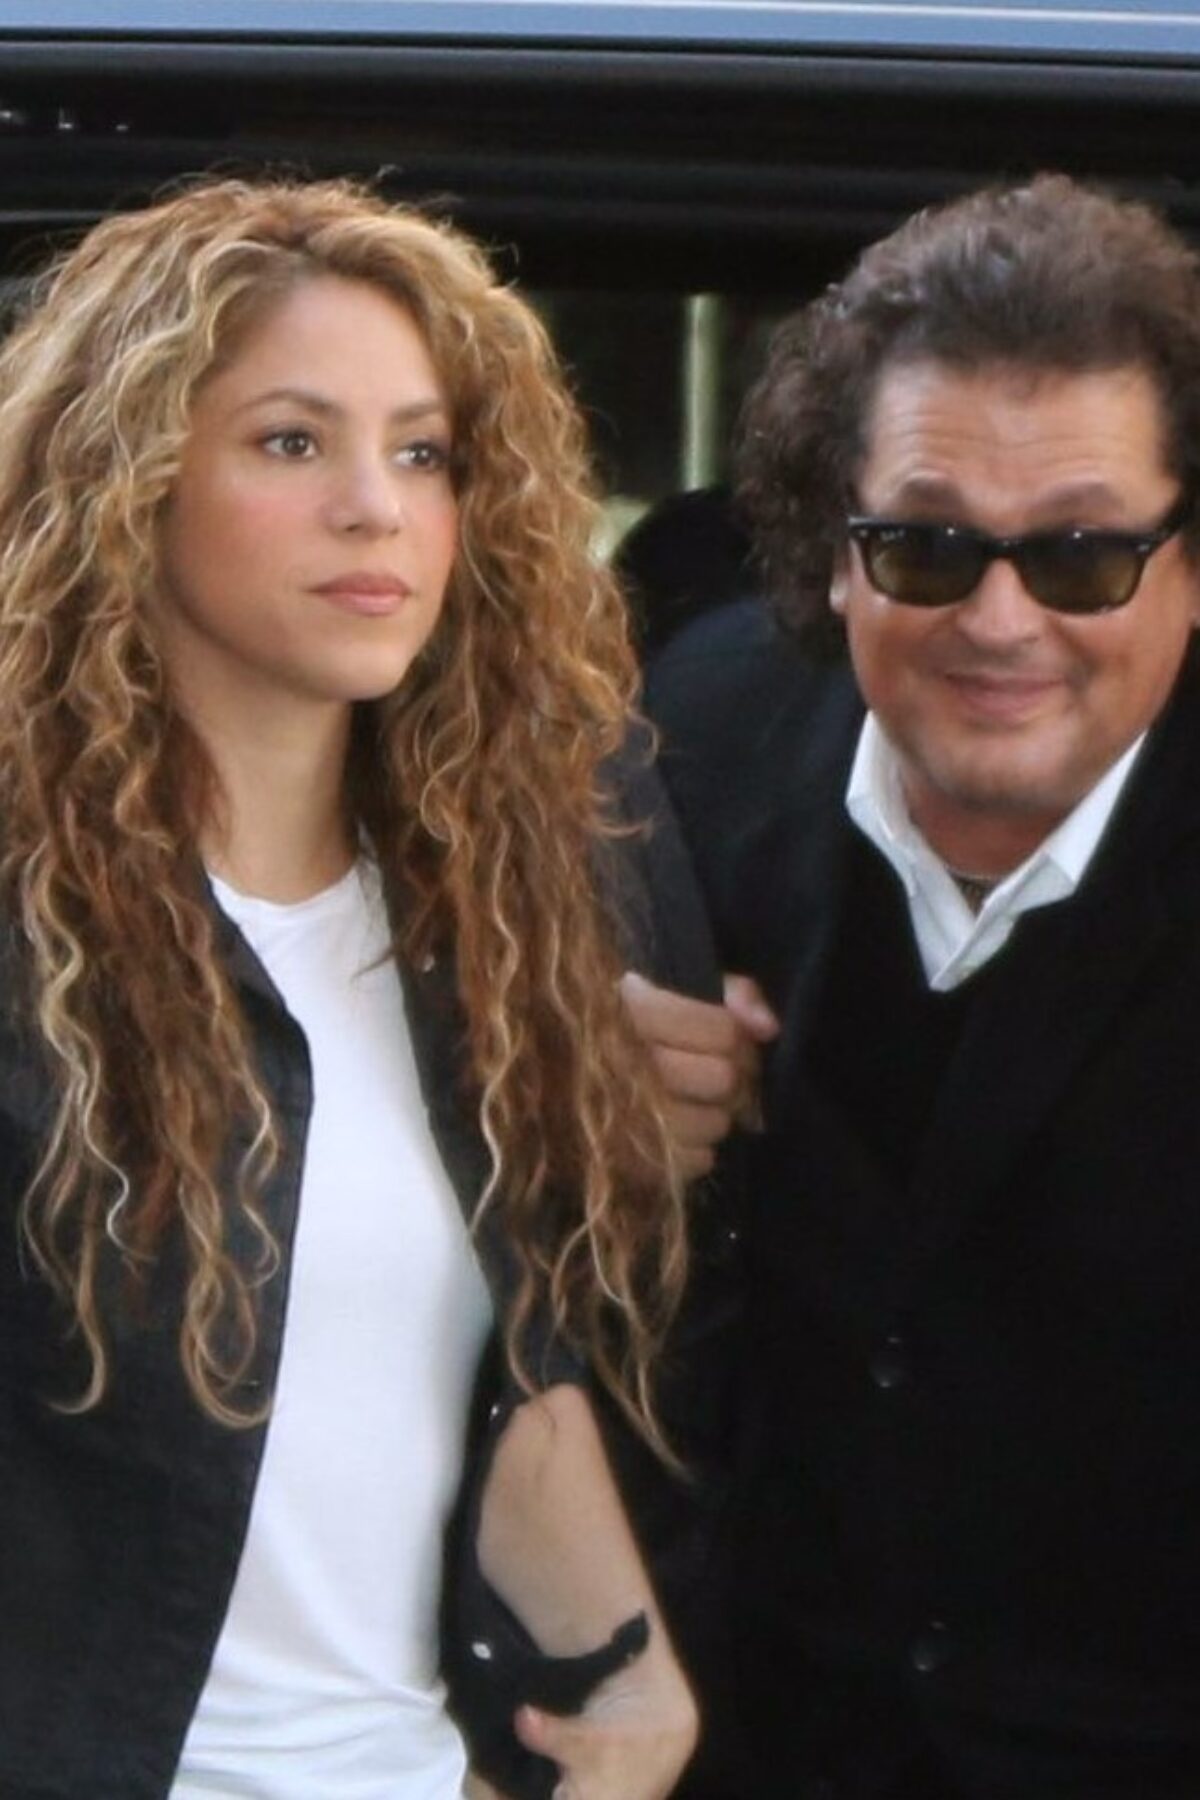 MADRID, SPAIN - MARCH 27: Tonino Mebarak (L), Shakira and Carlos Vives (R) attend court for plagiarising the song 'La Bicicleta' on March 27, 2019 in Madrid, Spain. (Photo by Europa Press Entertainment/Europa Press via Getty Images)